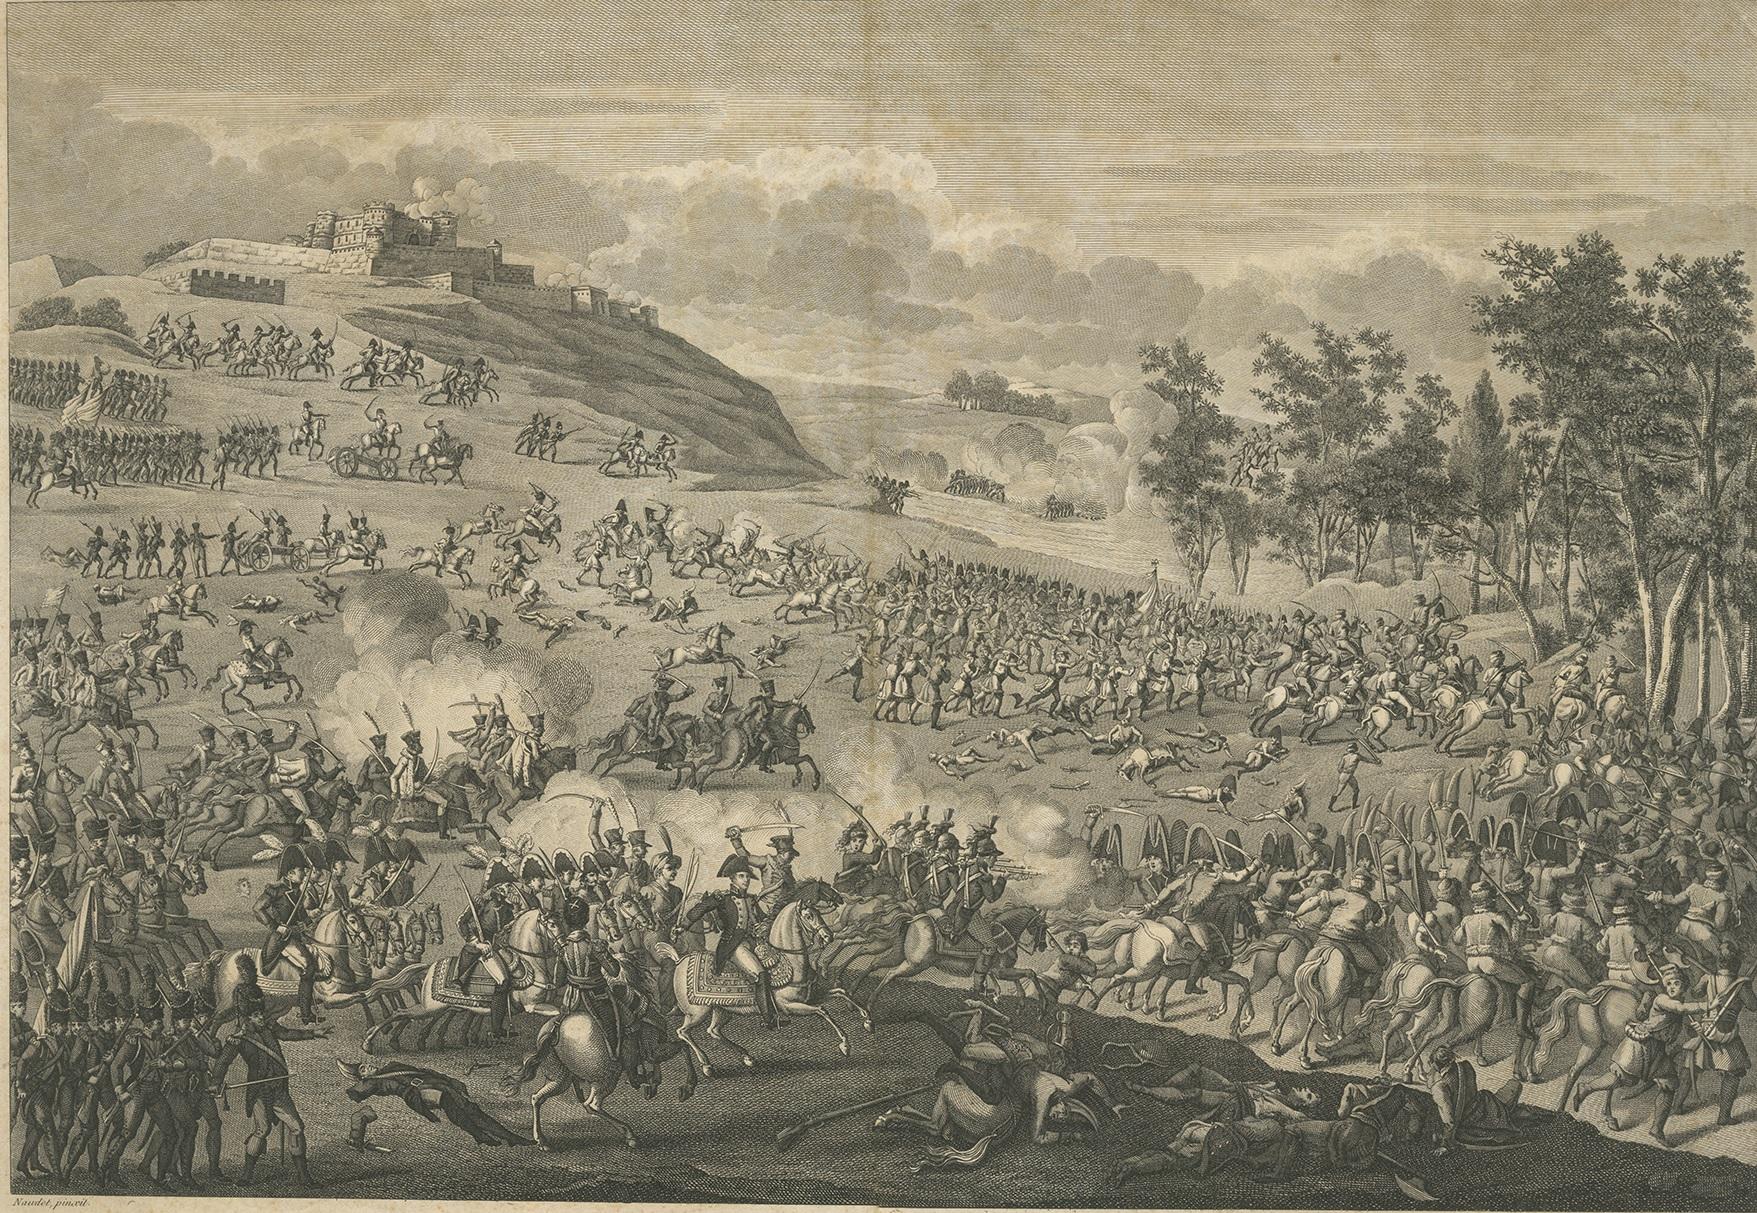 Antique print titled 'Bataille de la Moskowa'. Scene of the Battle of Borodino, a battle fought on 7 September 1812 in the Napoleonic Wars during the French invasion of Russia. Engraved by le Beau after a painting by Naudet. Published, circa 1820.